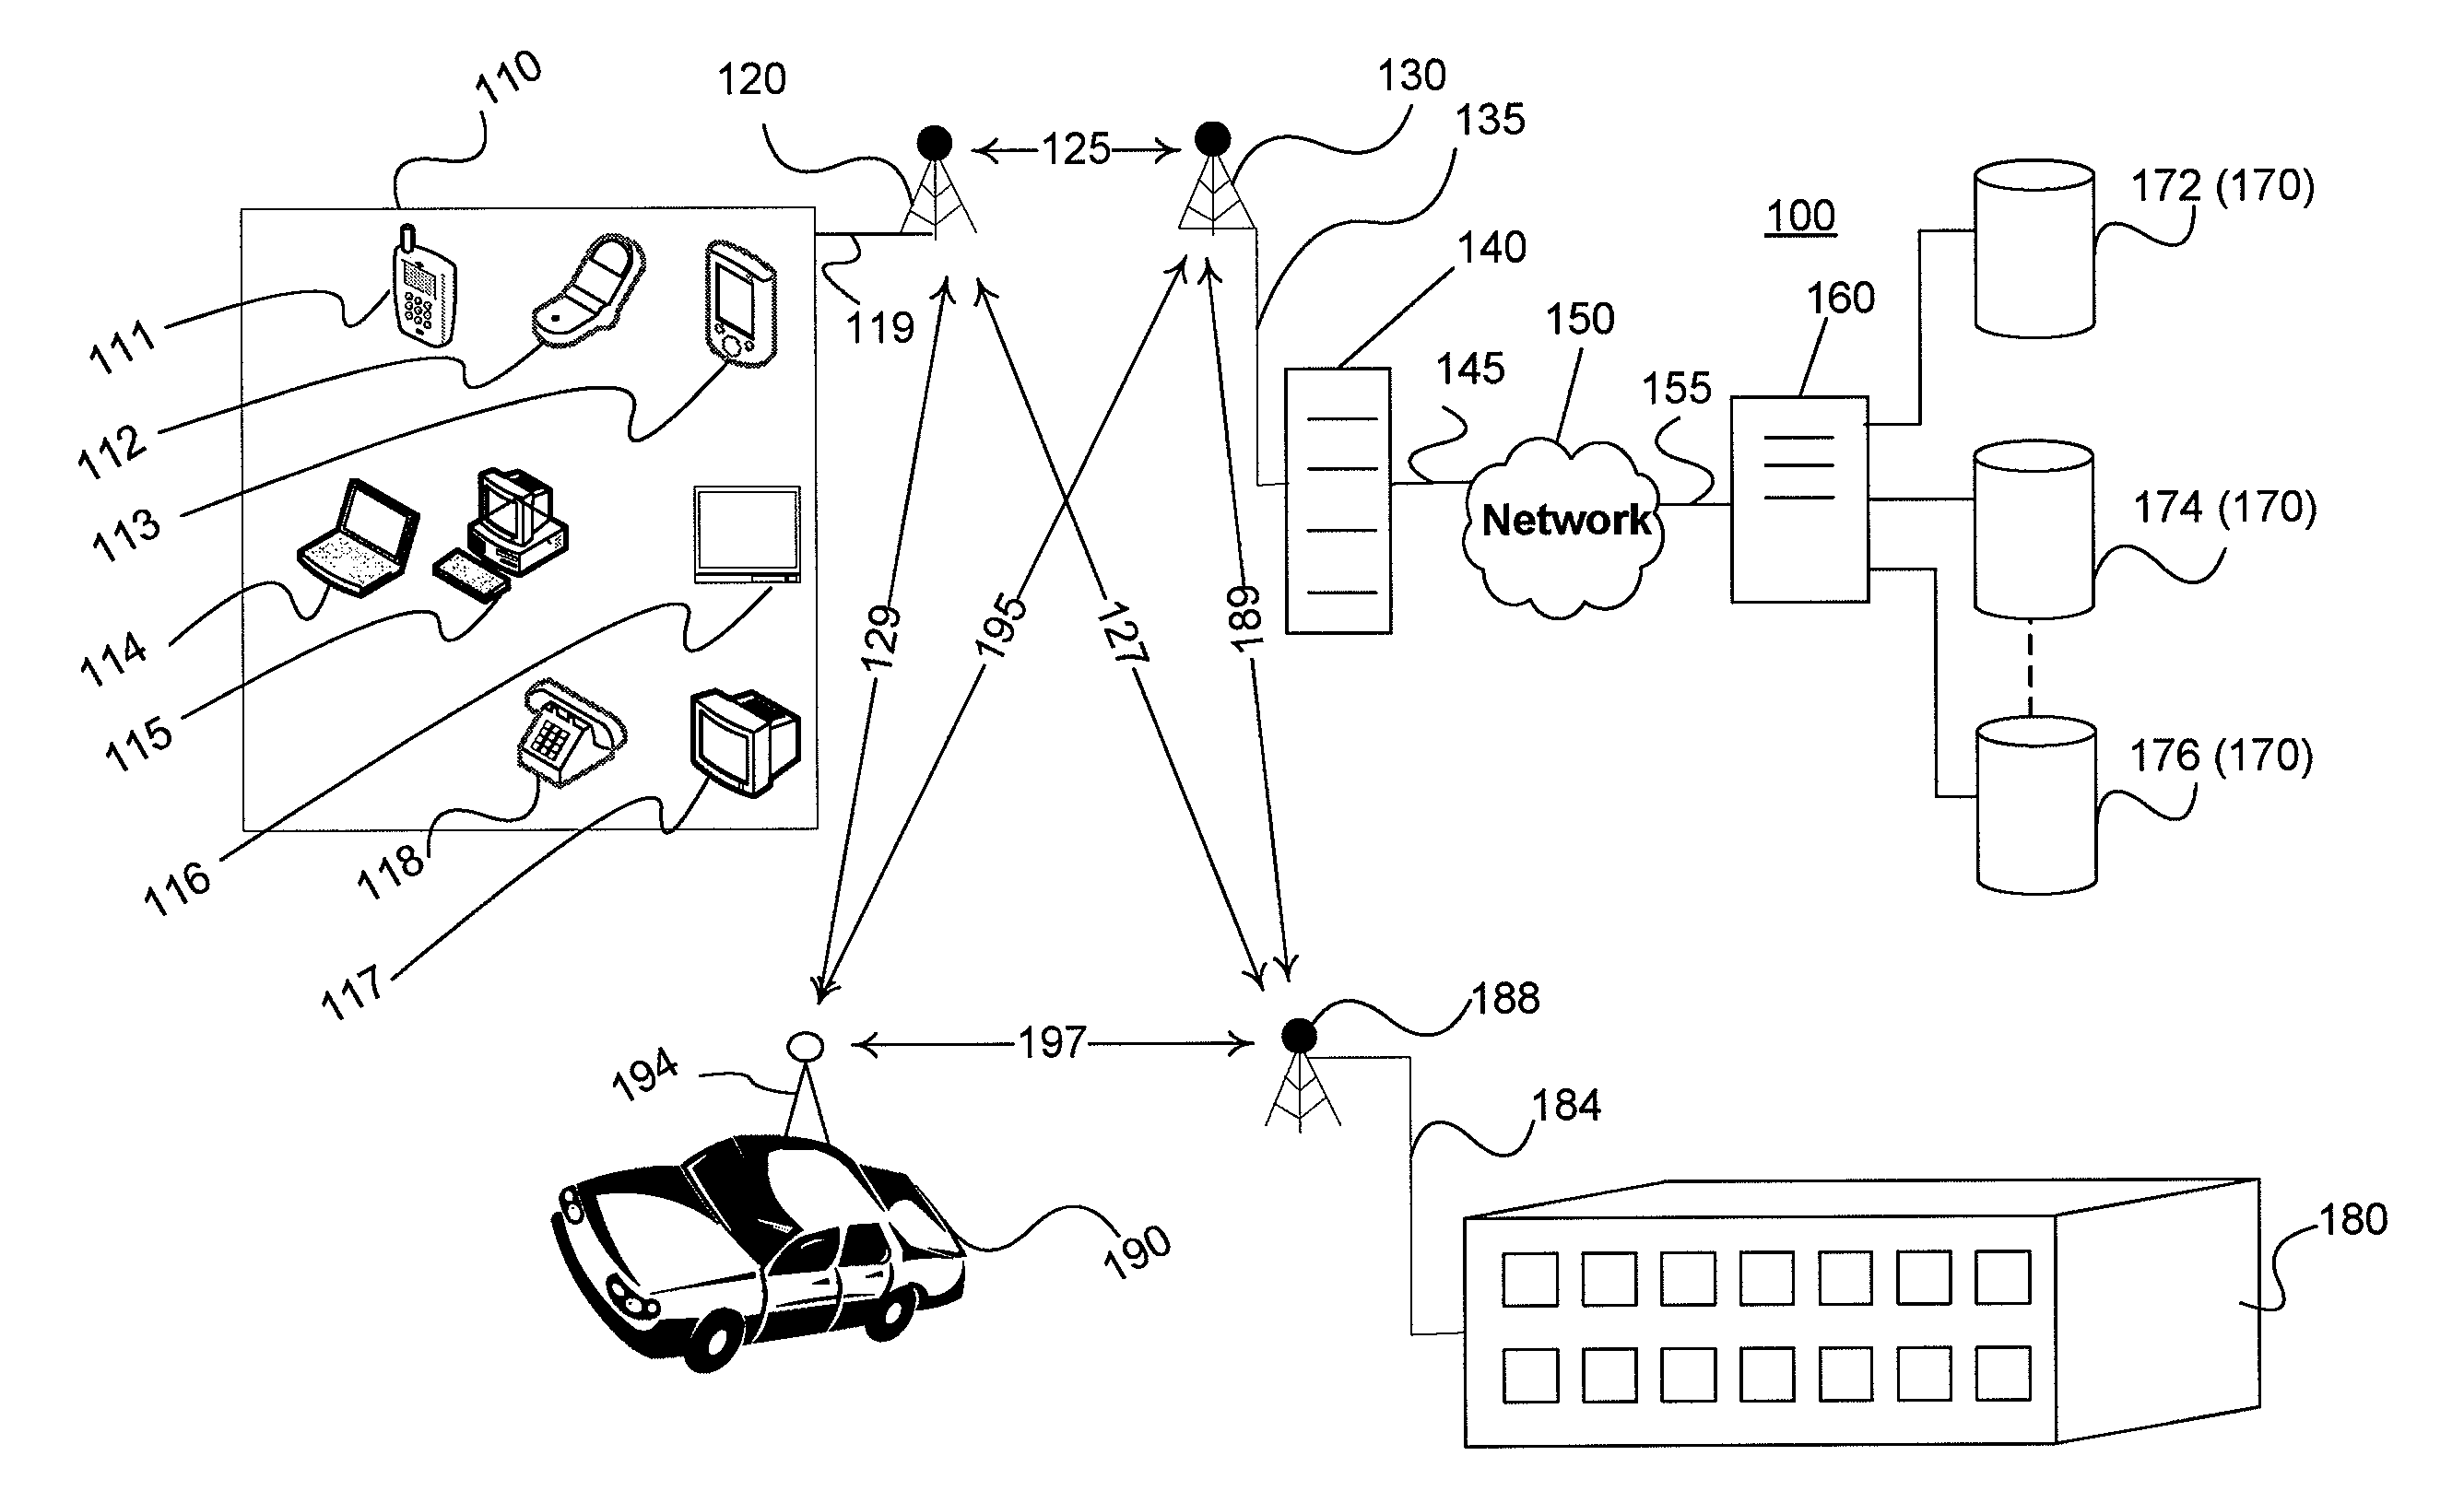 Method and system for on-demand and scheduled services relating to travel and transportation